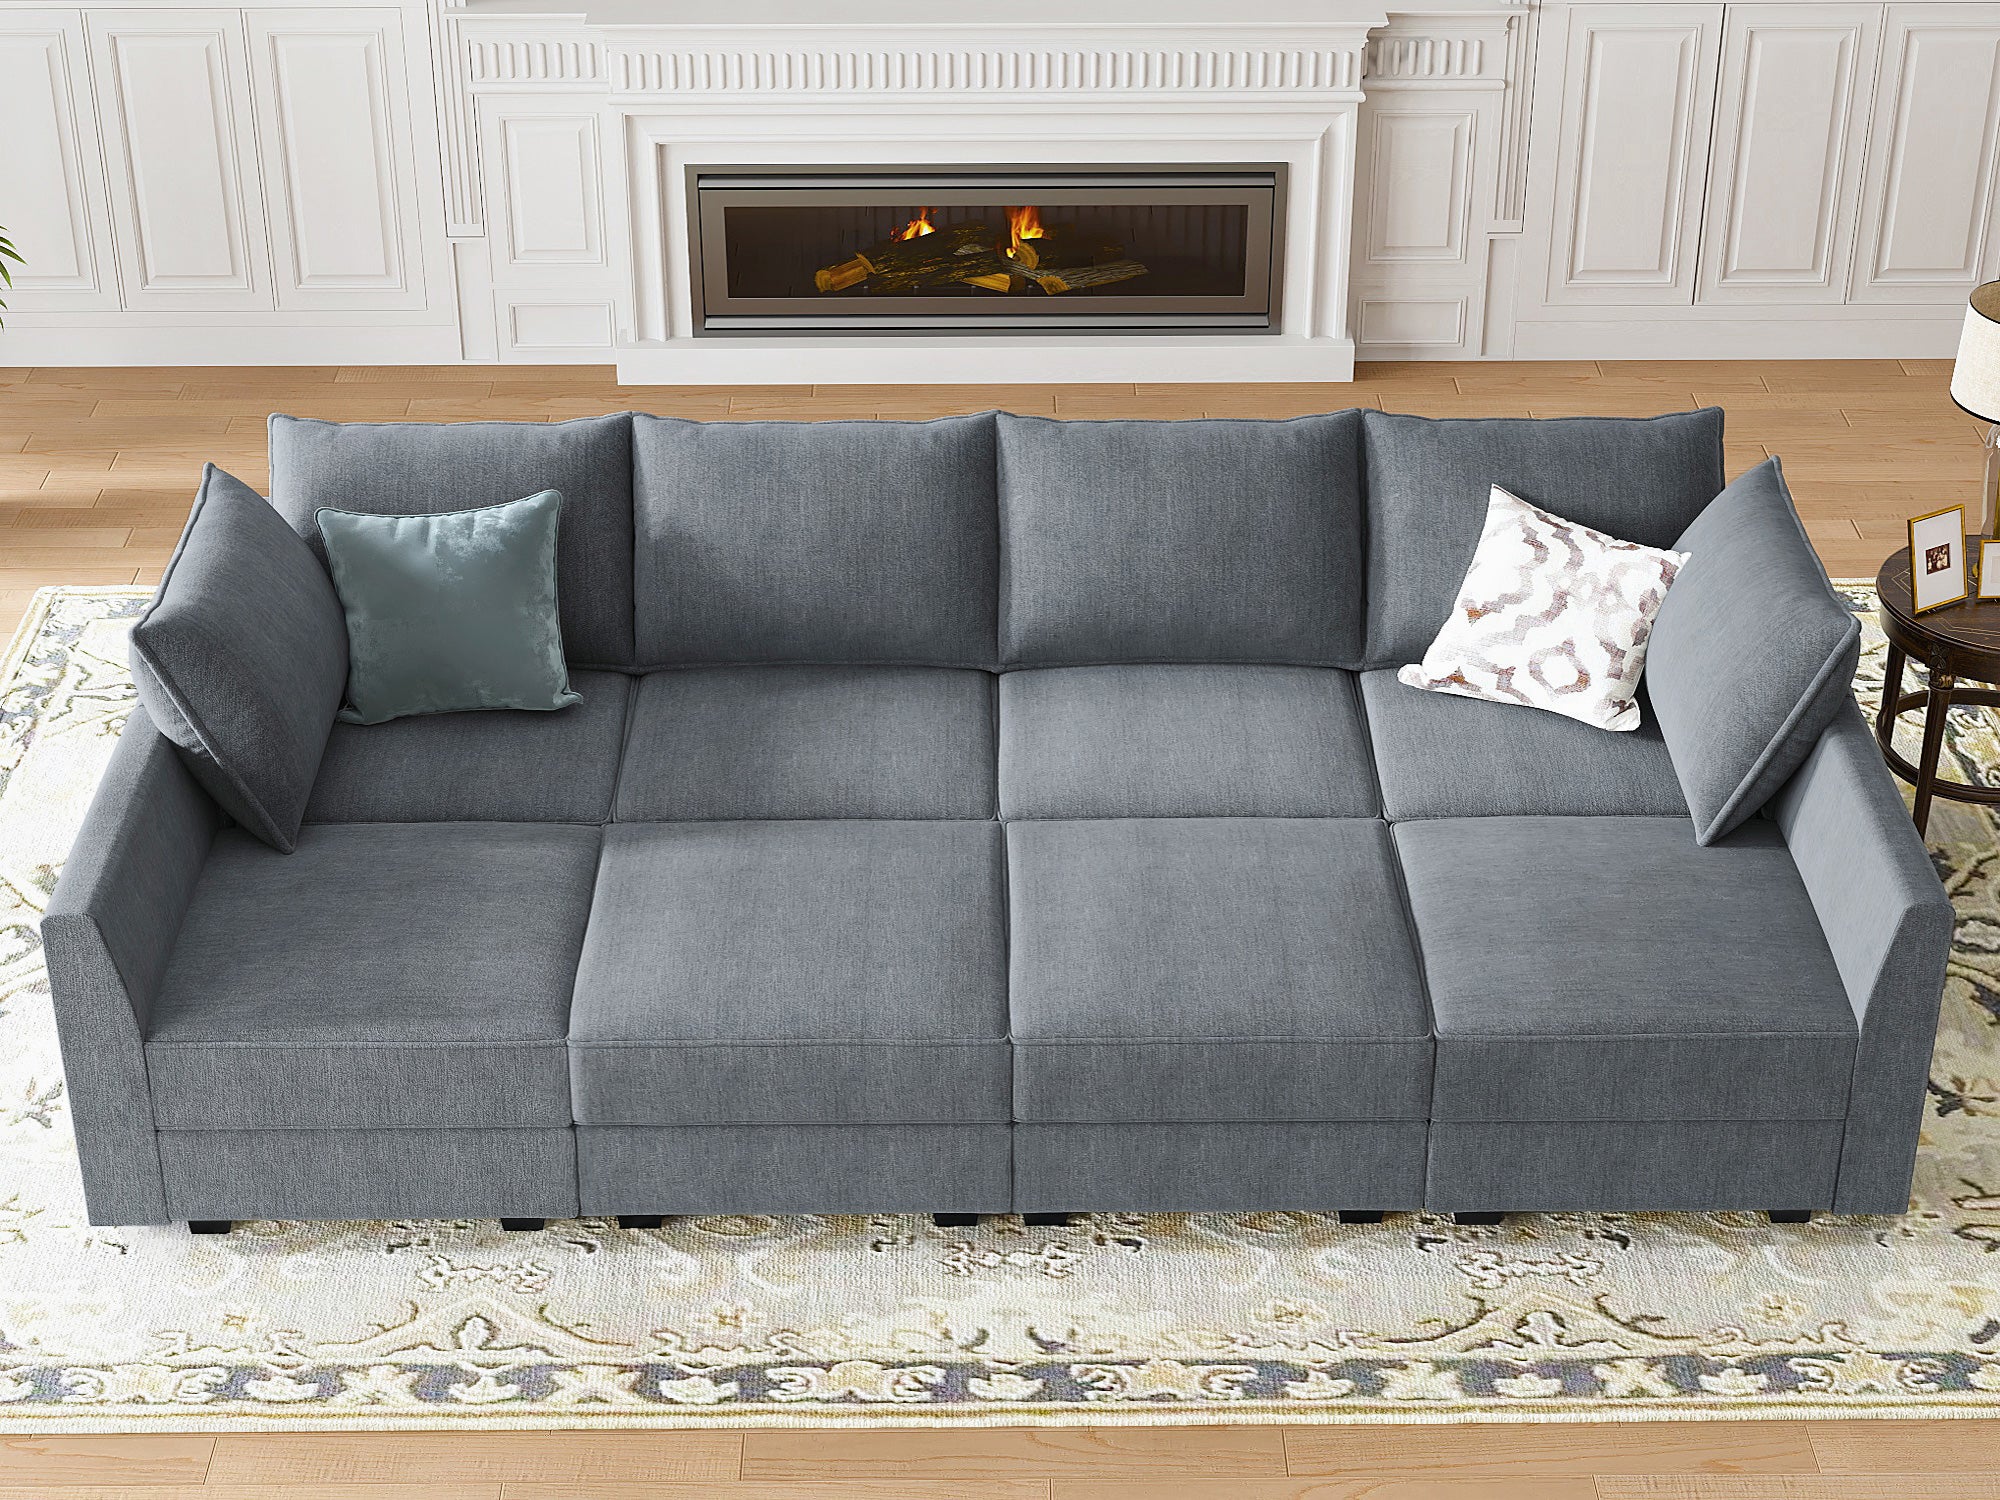 HONBAY Polyester Modular Sleeper Sectional With Storage Seat